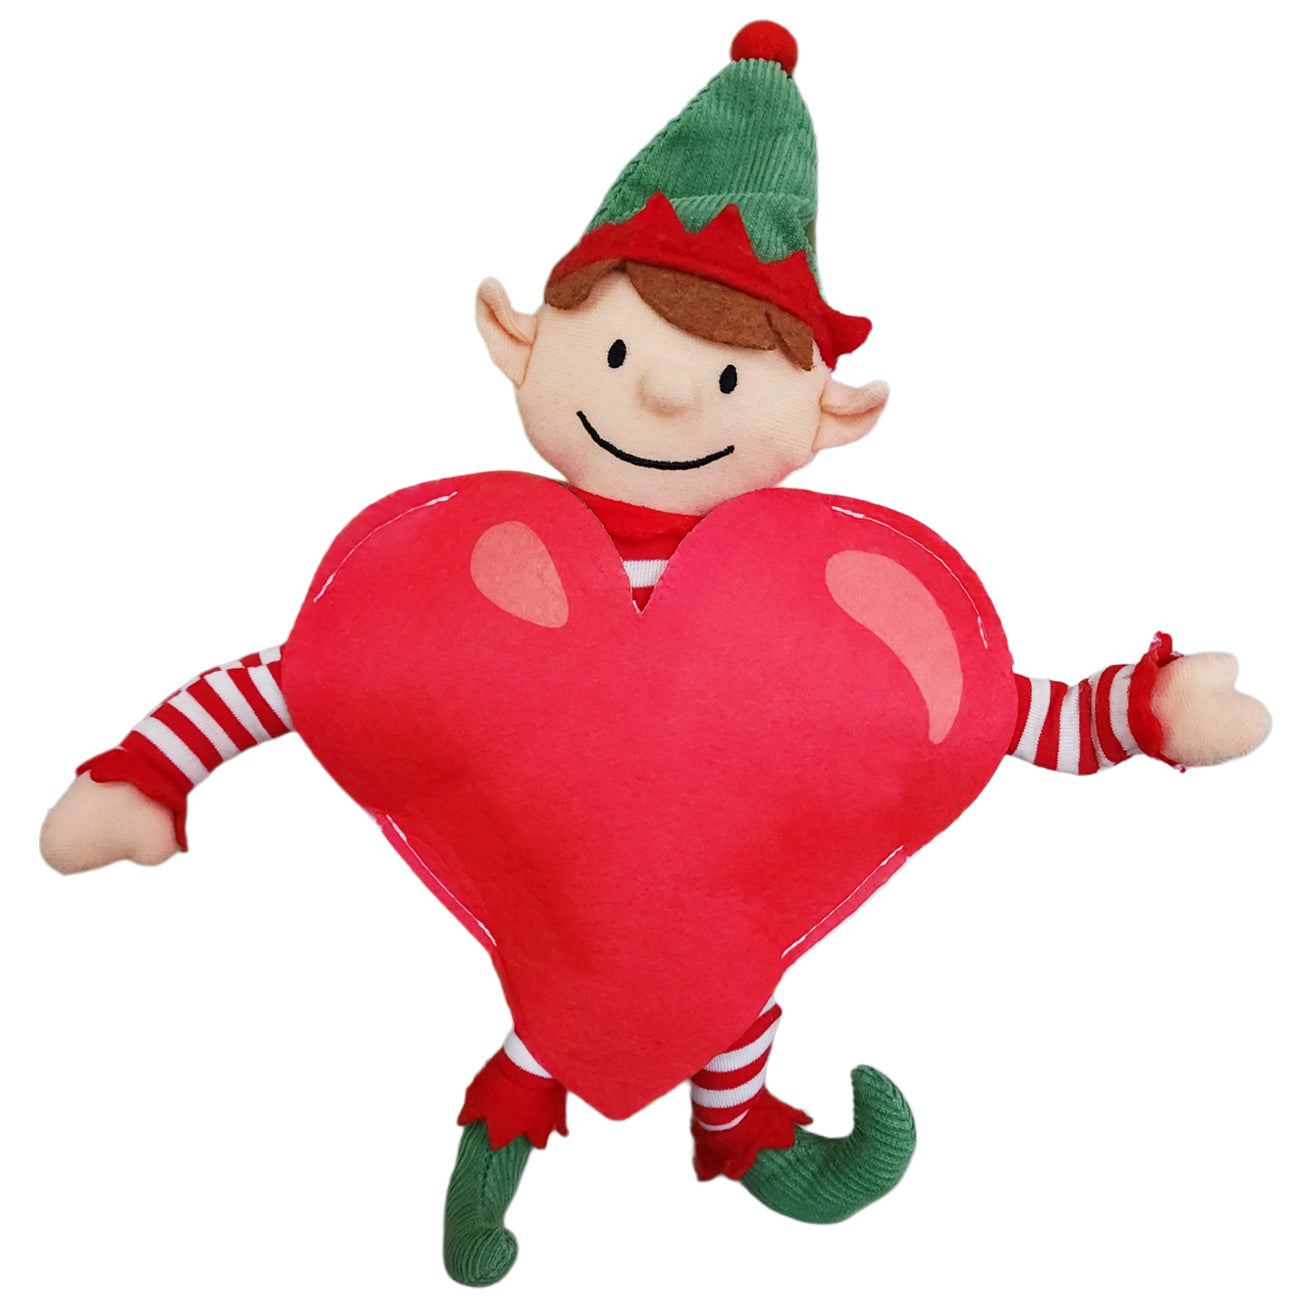 Heart Elf Costume worn by Elf For Christmas